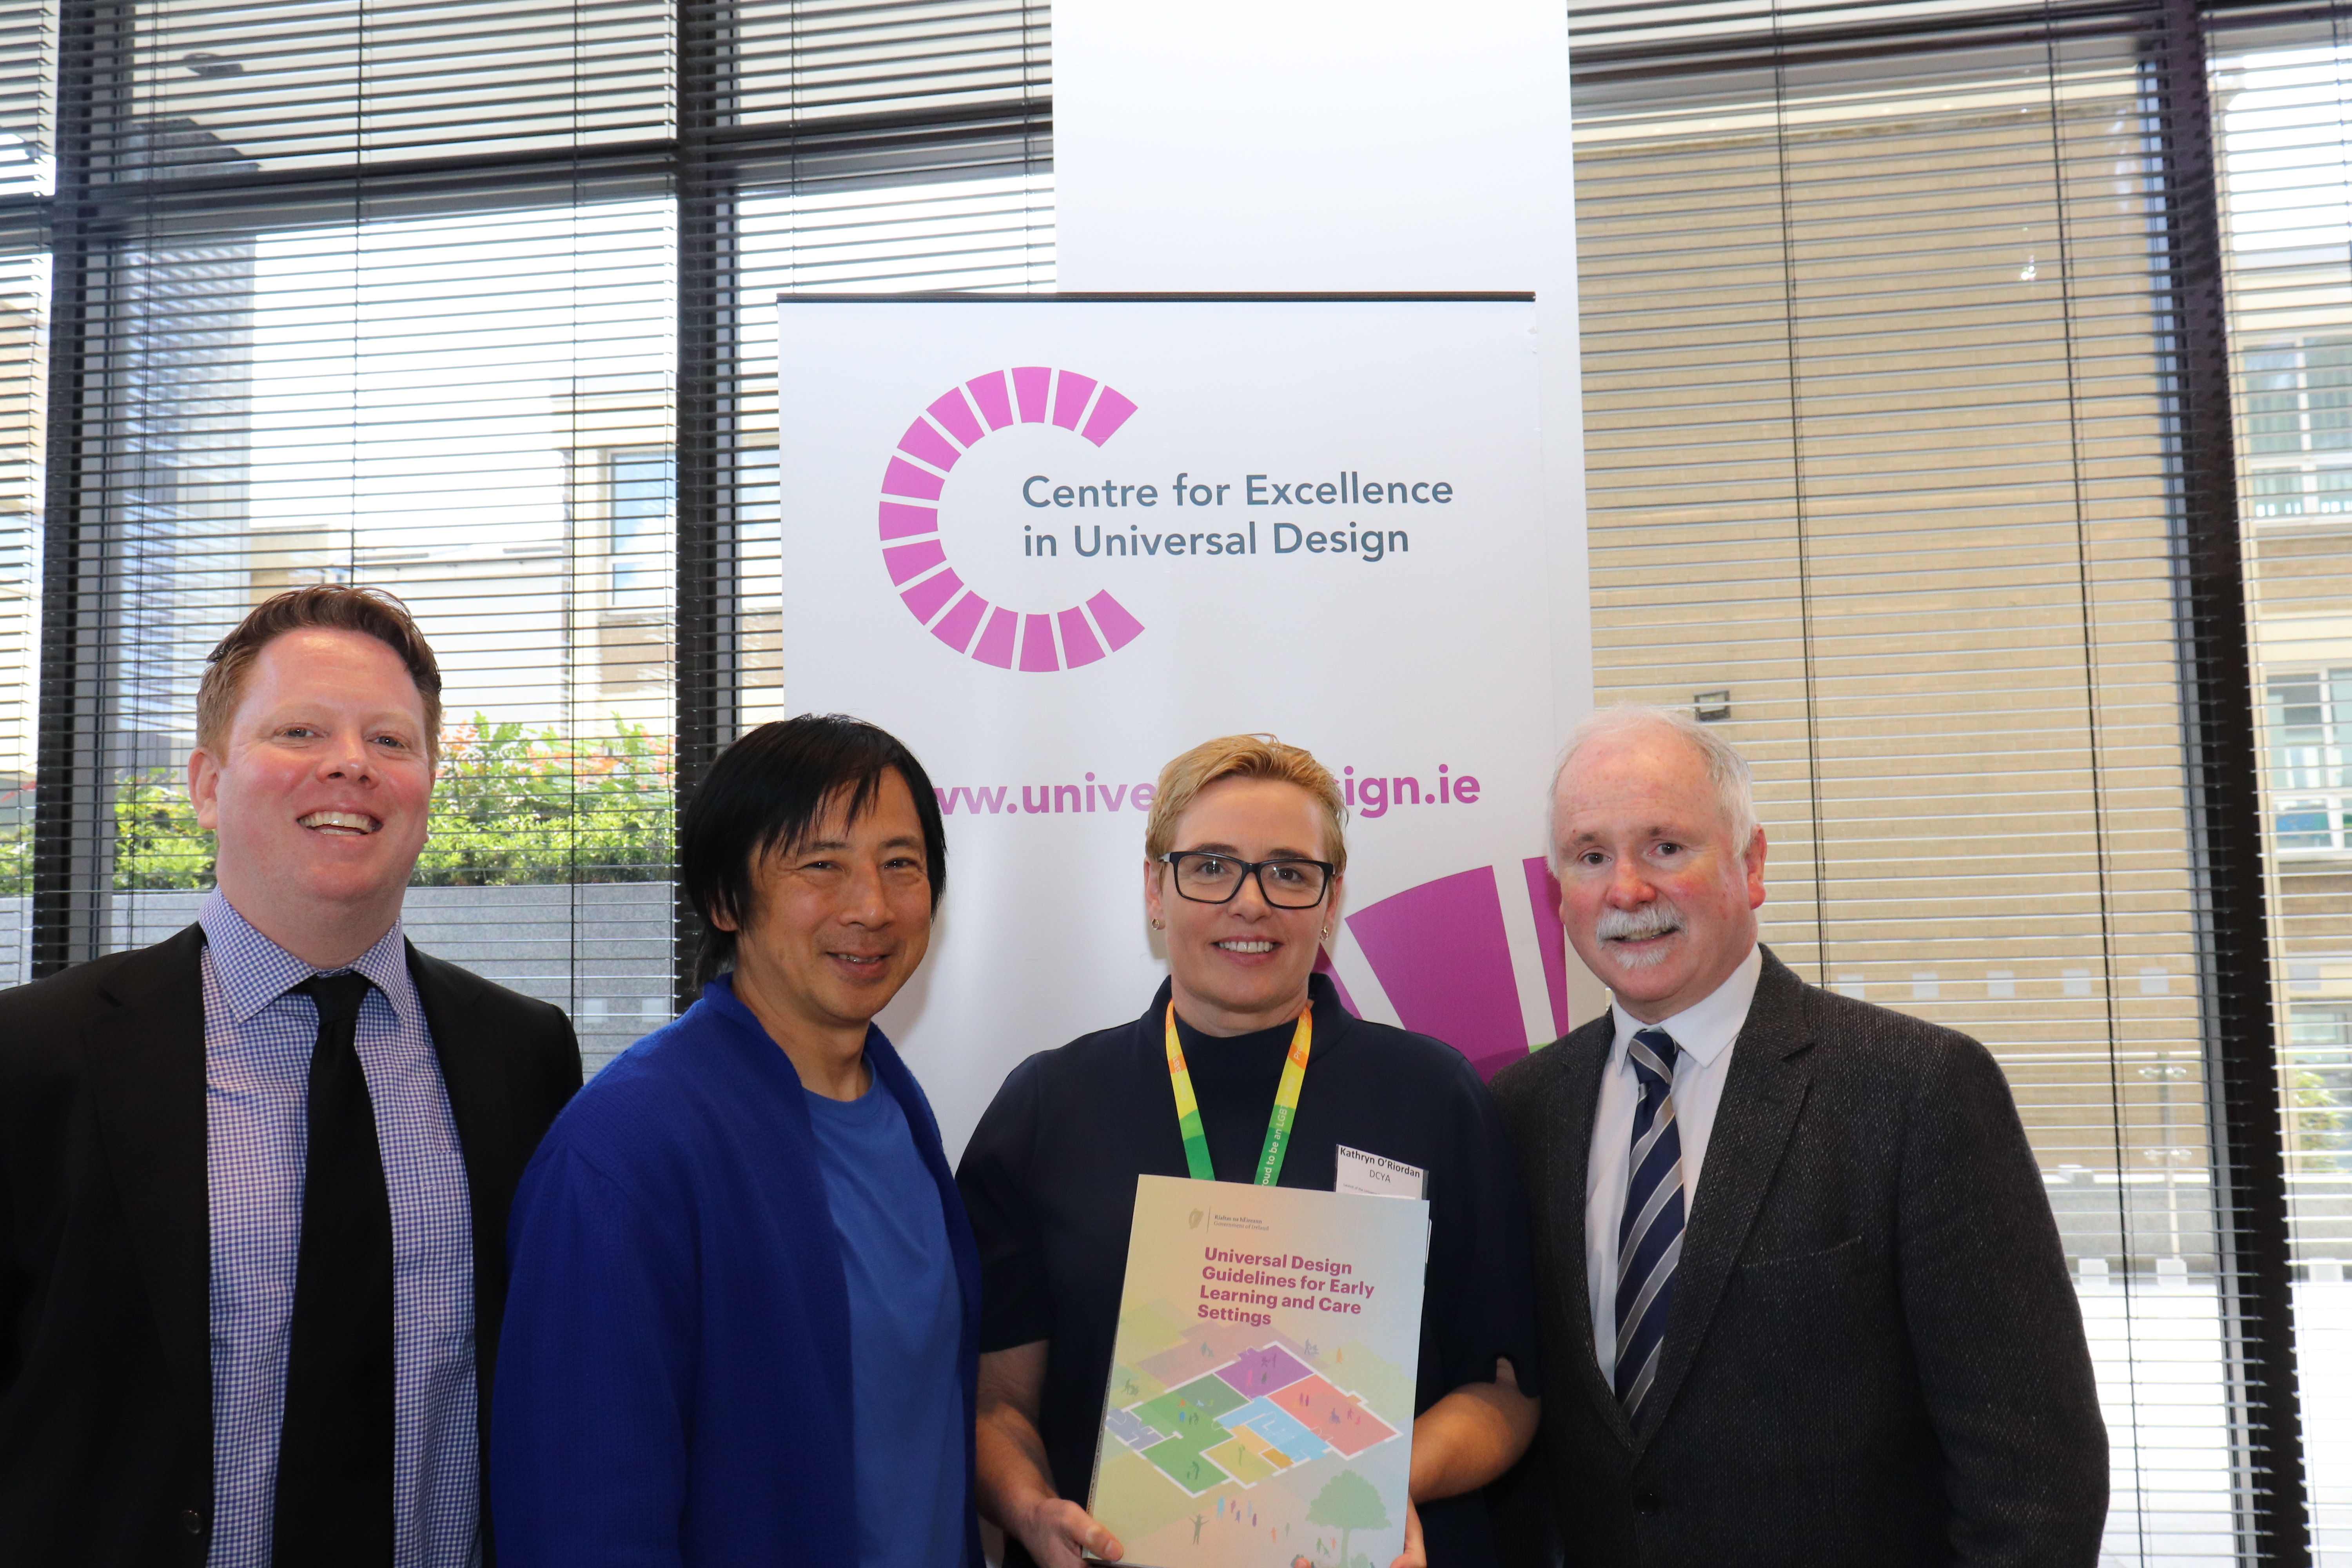 Launch of The Universal Design Guidelines for Early Learning and Care Settings